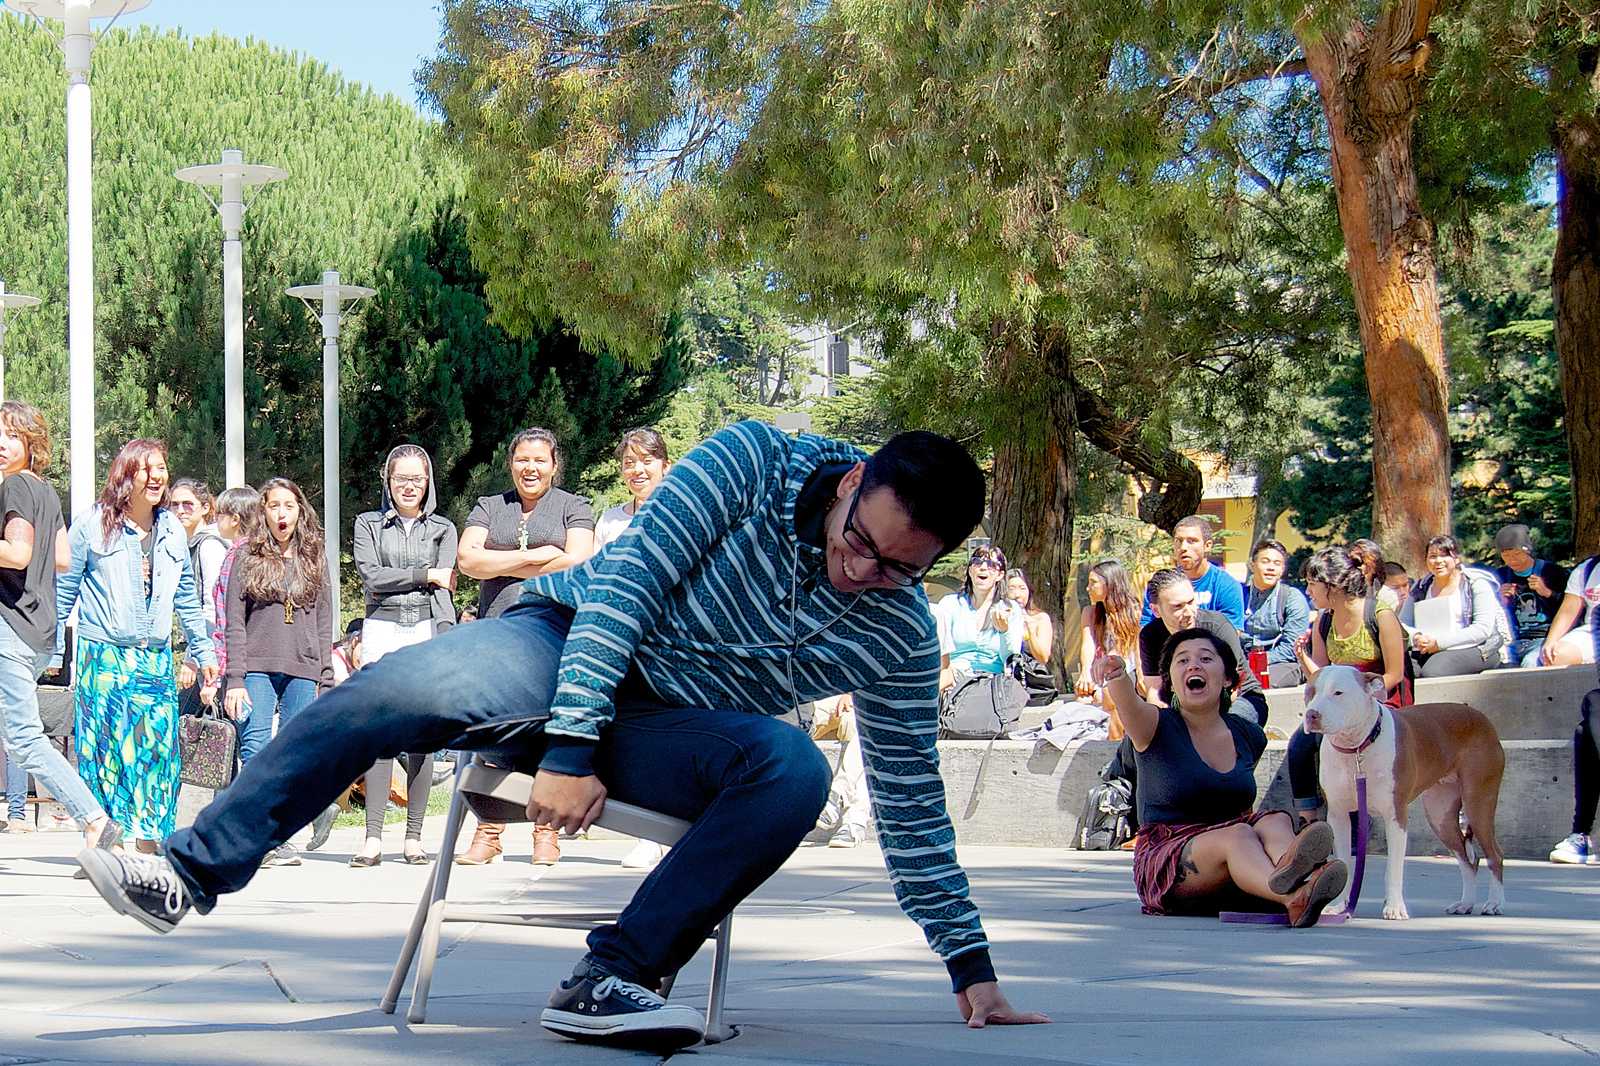 Javier Morelos Garza grabs the final seat during musical chairs at the La Raza Student Organization's festival in Malcolm X Plaza Sept 18, 2013. Photo by Kate O'Neal / Xpress 